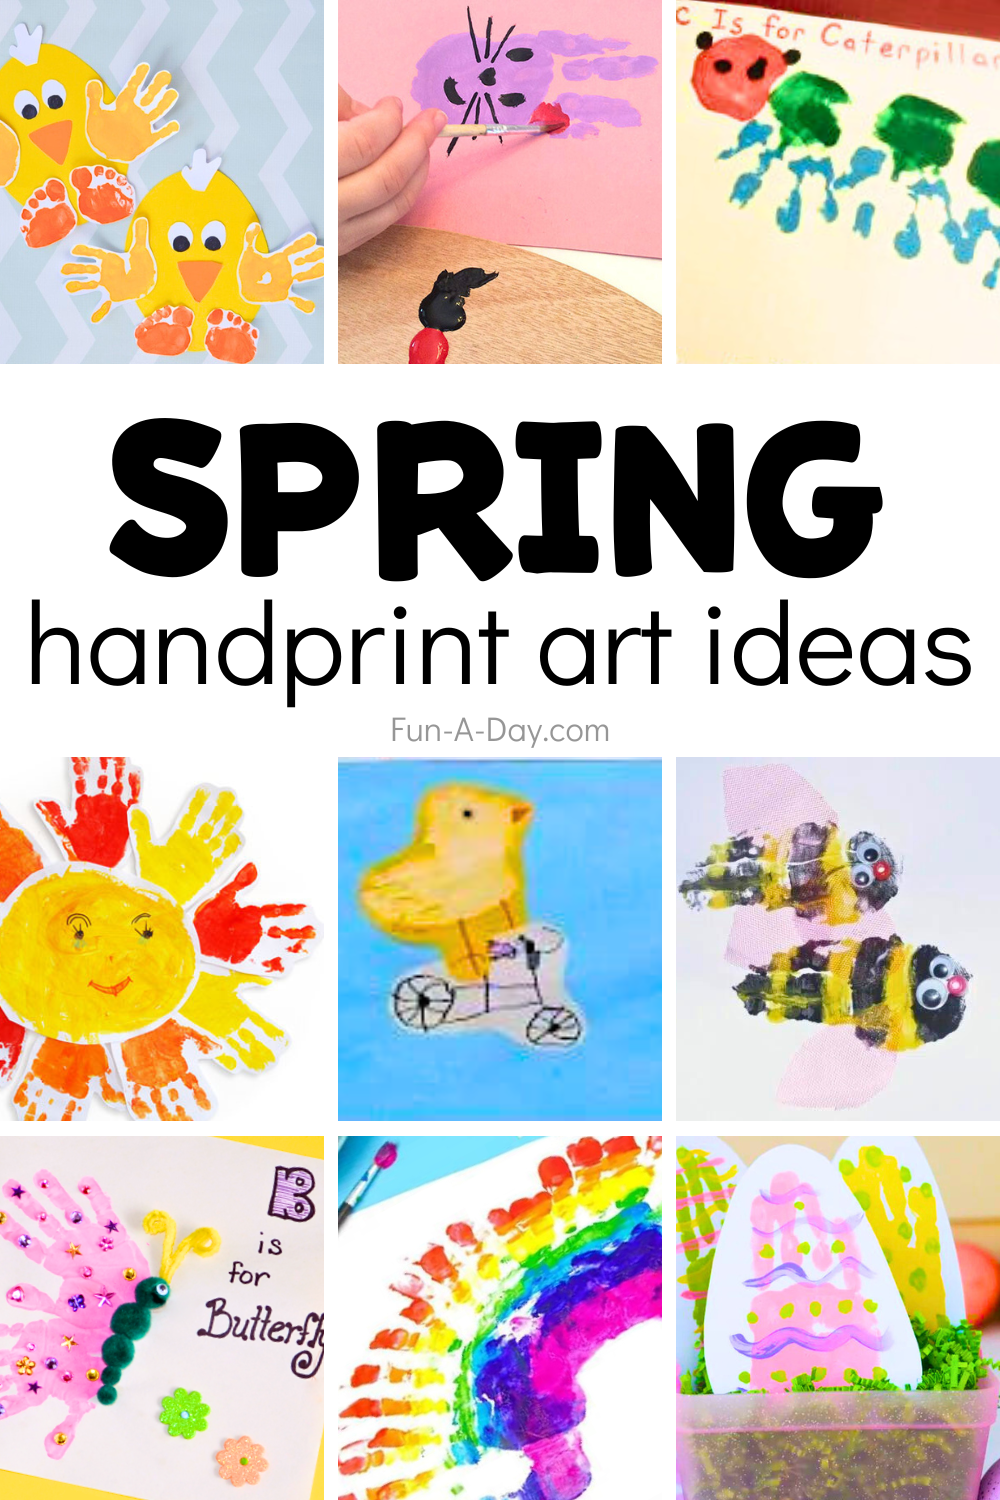 Nine spring handprint art ideas with text that reads spring handprint art ideas.